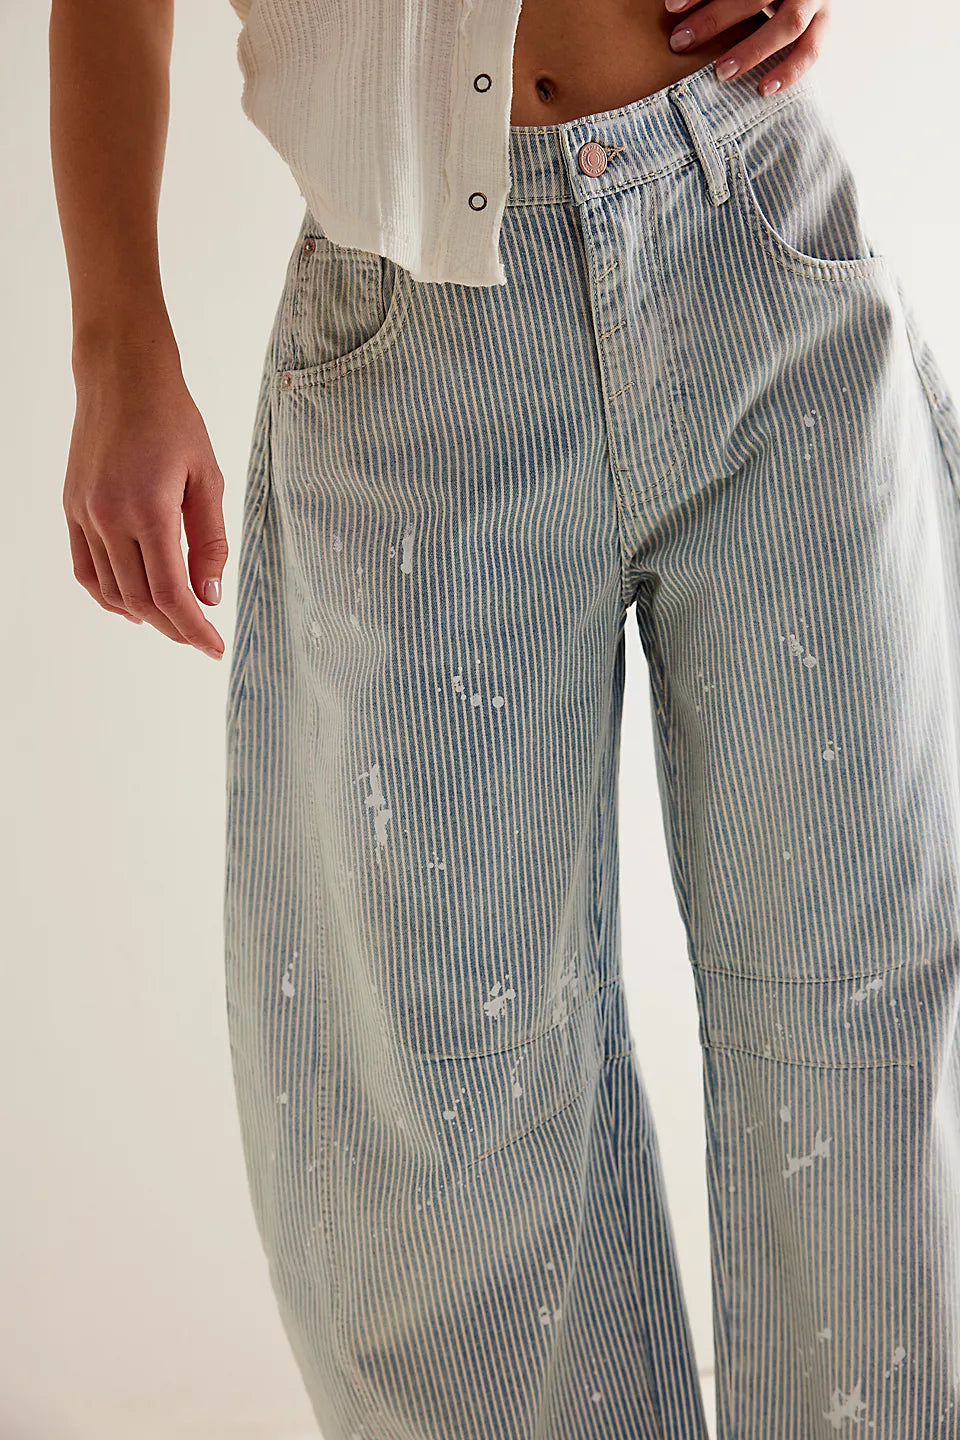 Free People We The Free Good Luck Mid-Rise Stripe Barrel Jeans - Tracks - Sun Diego Boardshop